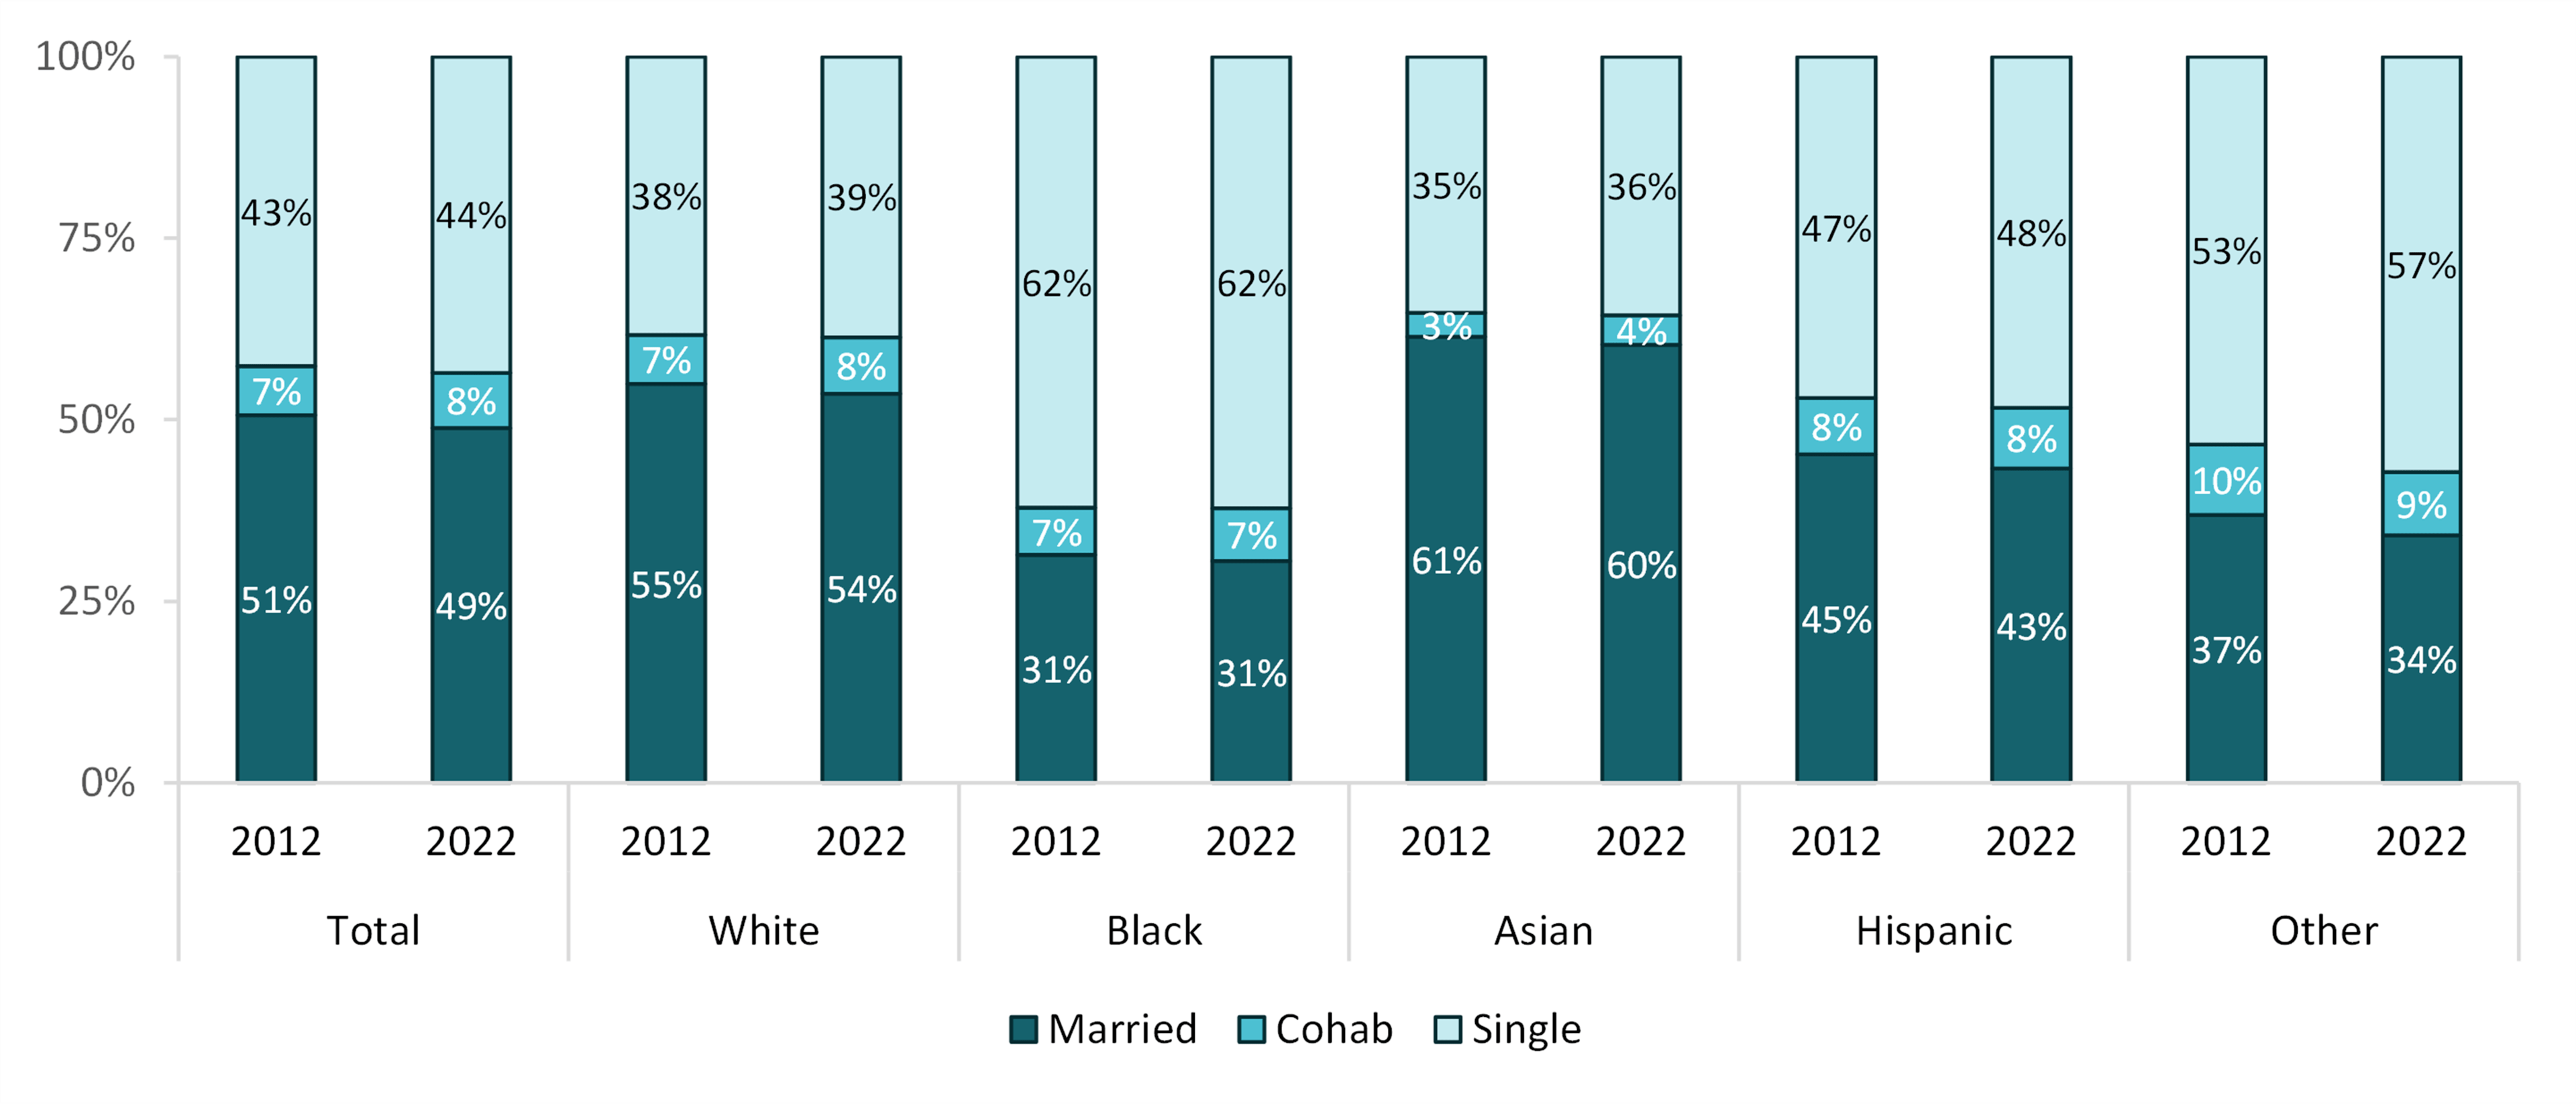 graph showing Figure 2.  Shares of Single, Cohabiting, and Married by Race/Ethnicity, 2012 & 2022